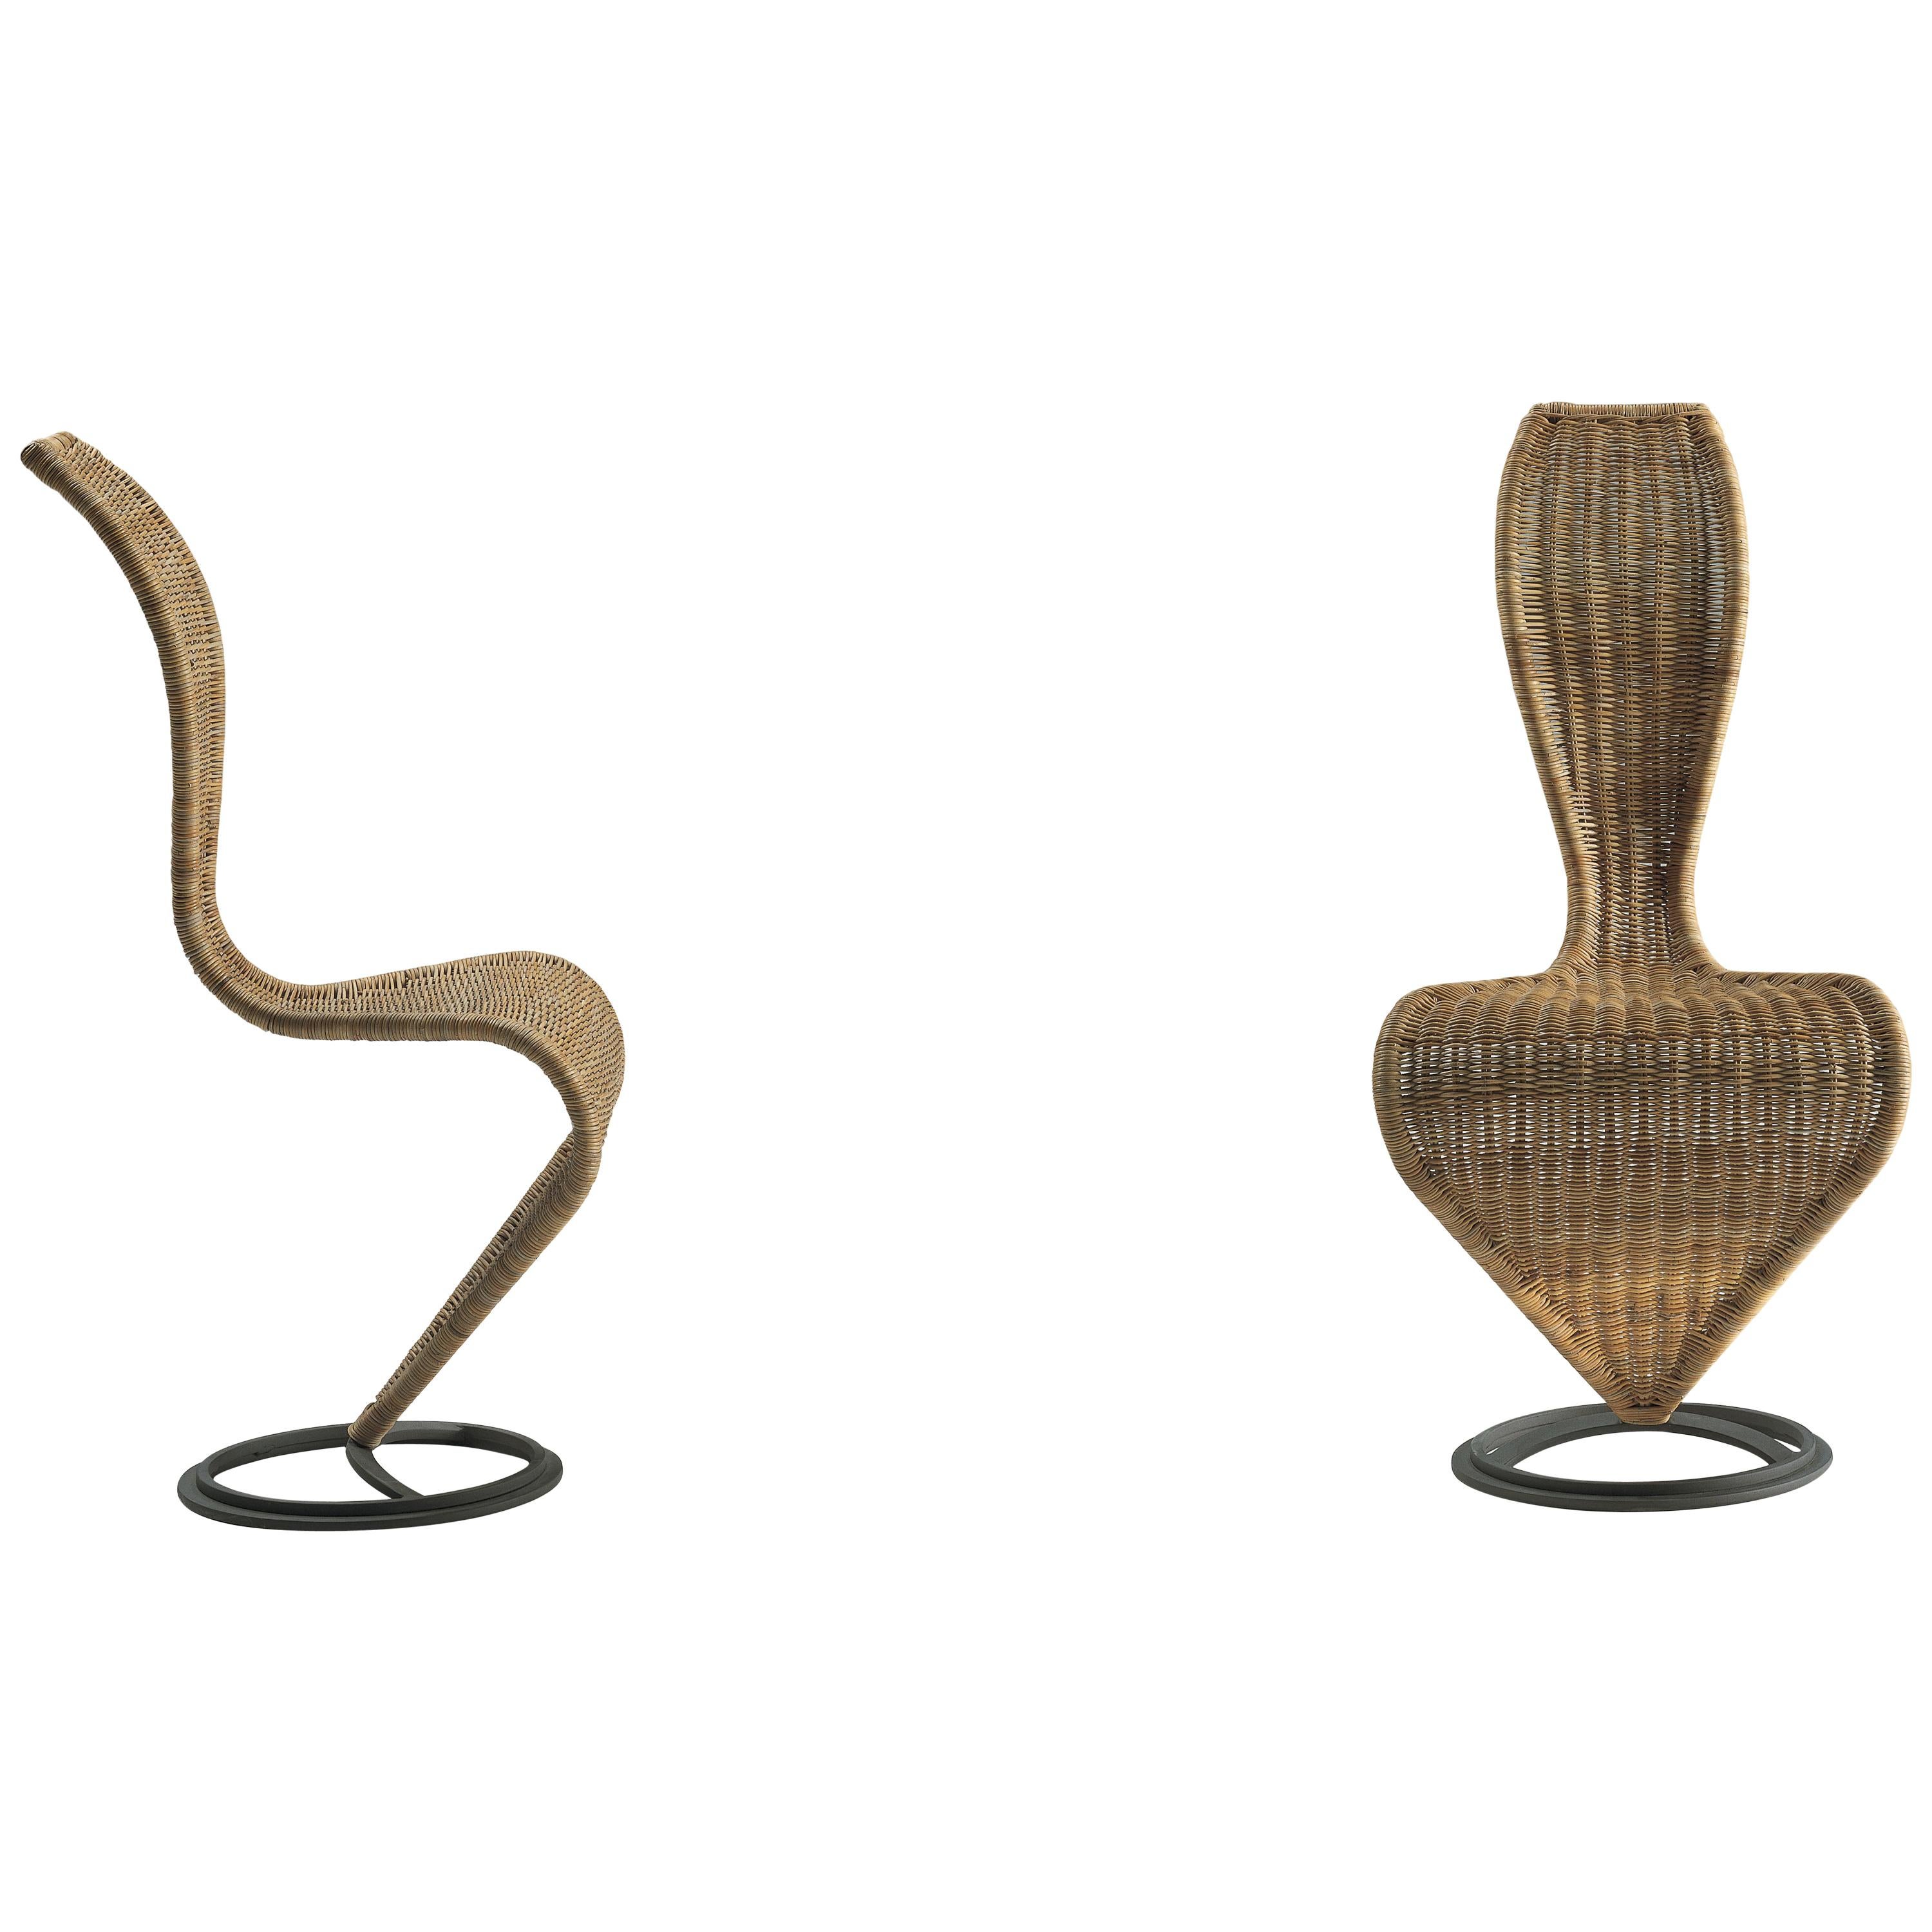 Tom Dixon S-Chair with Marsh Straw or Wicker Upholstery for Cappellini